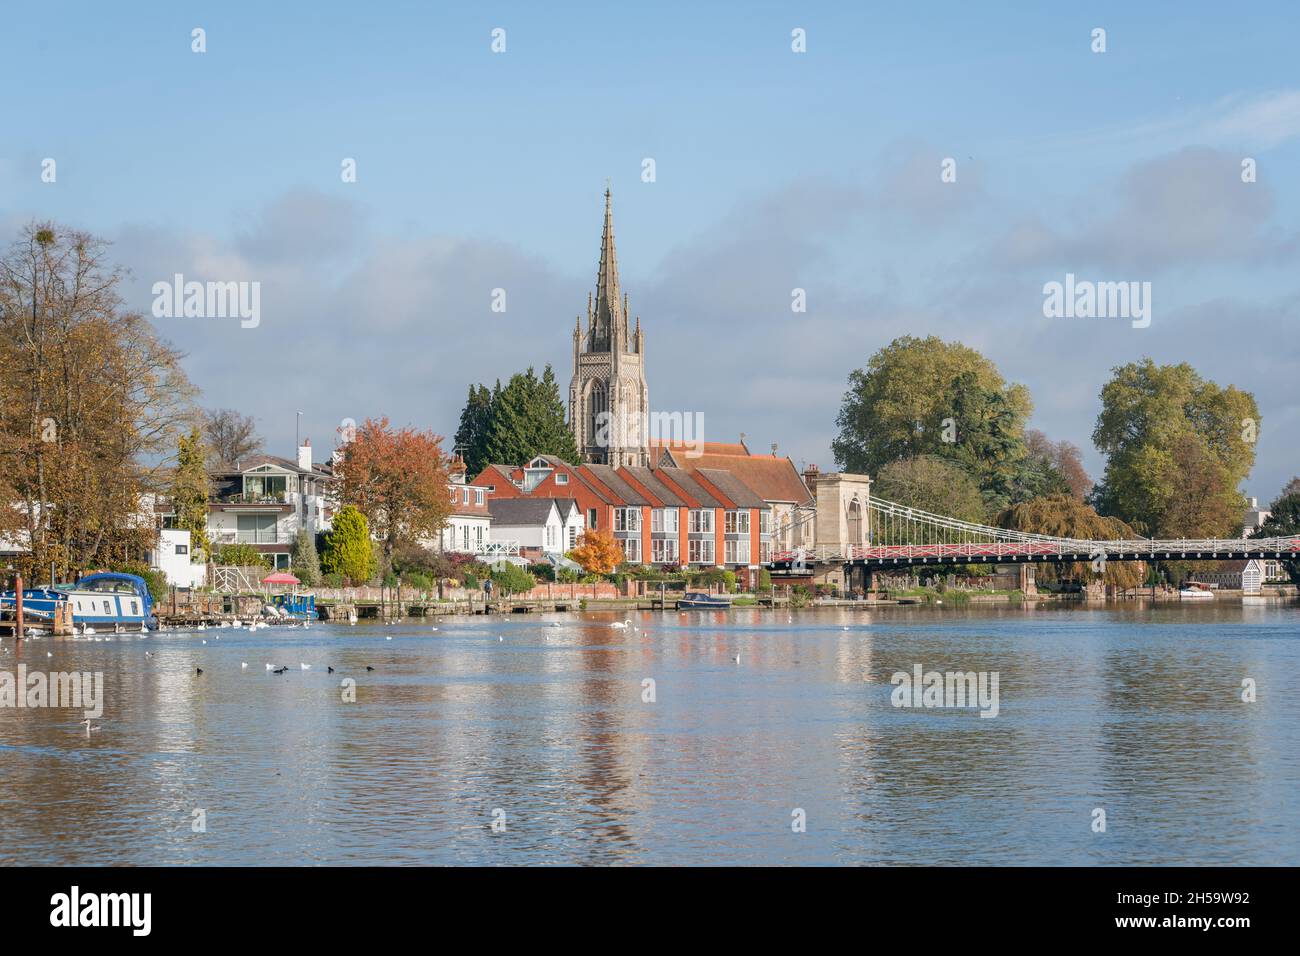 All Saint's Church and Marlow suspension bridge next to the River Thames at Marlow, Buckinghamshire, England. Stock Photo